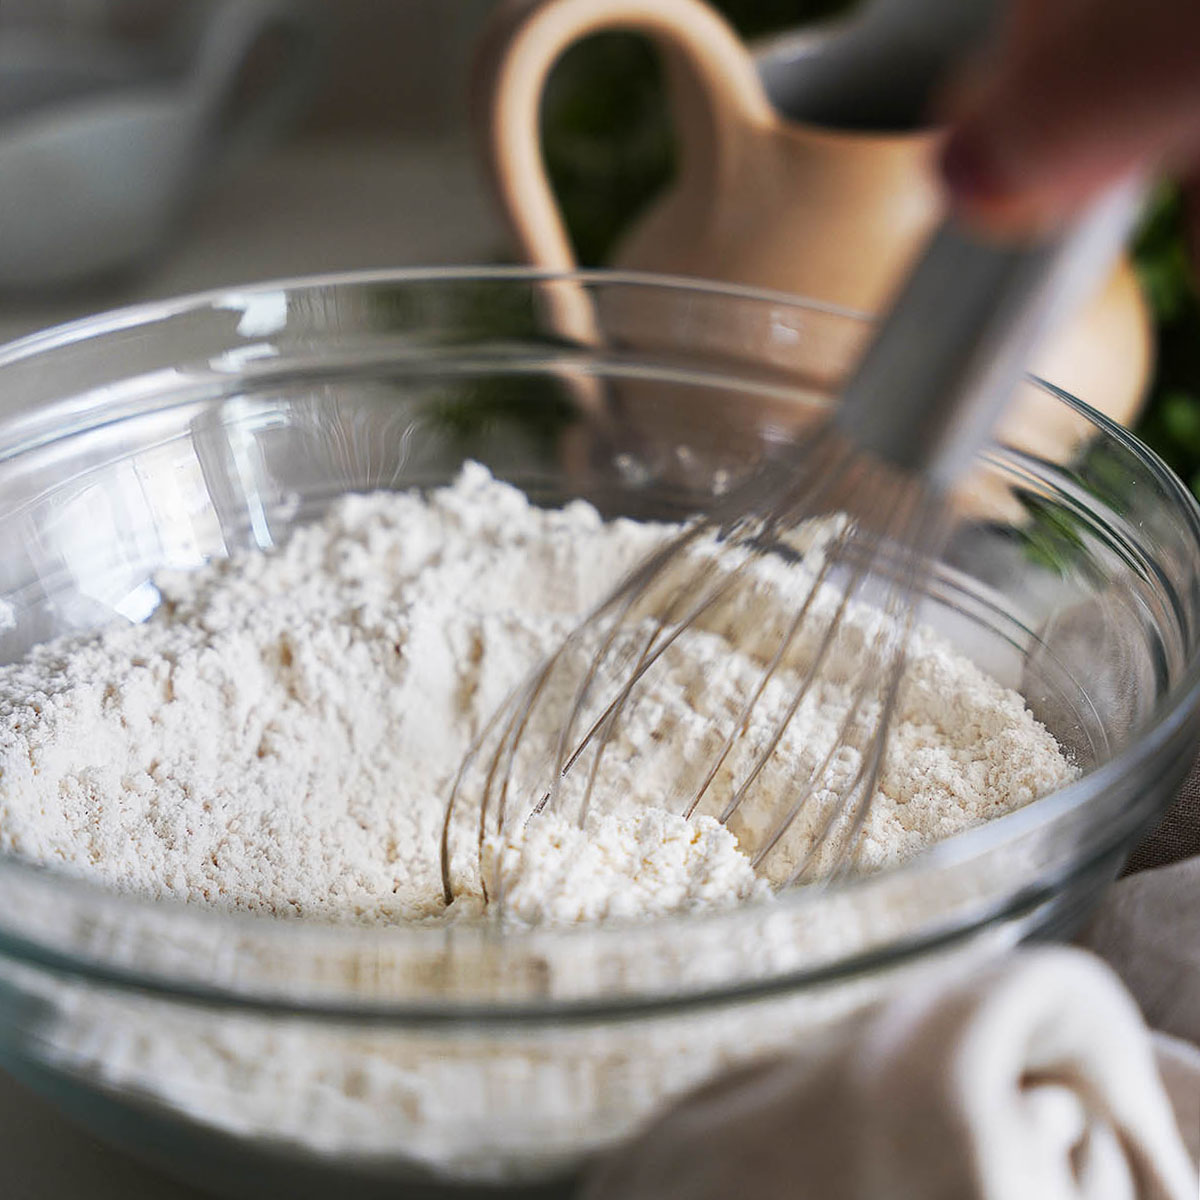 Whisking the flour in a bowl.